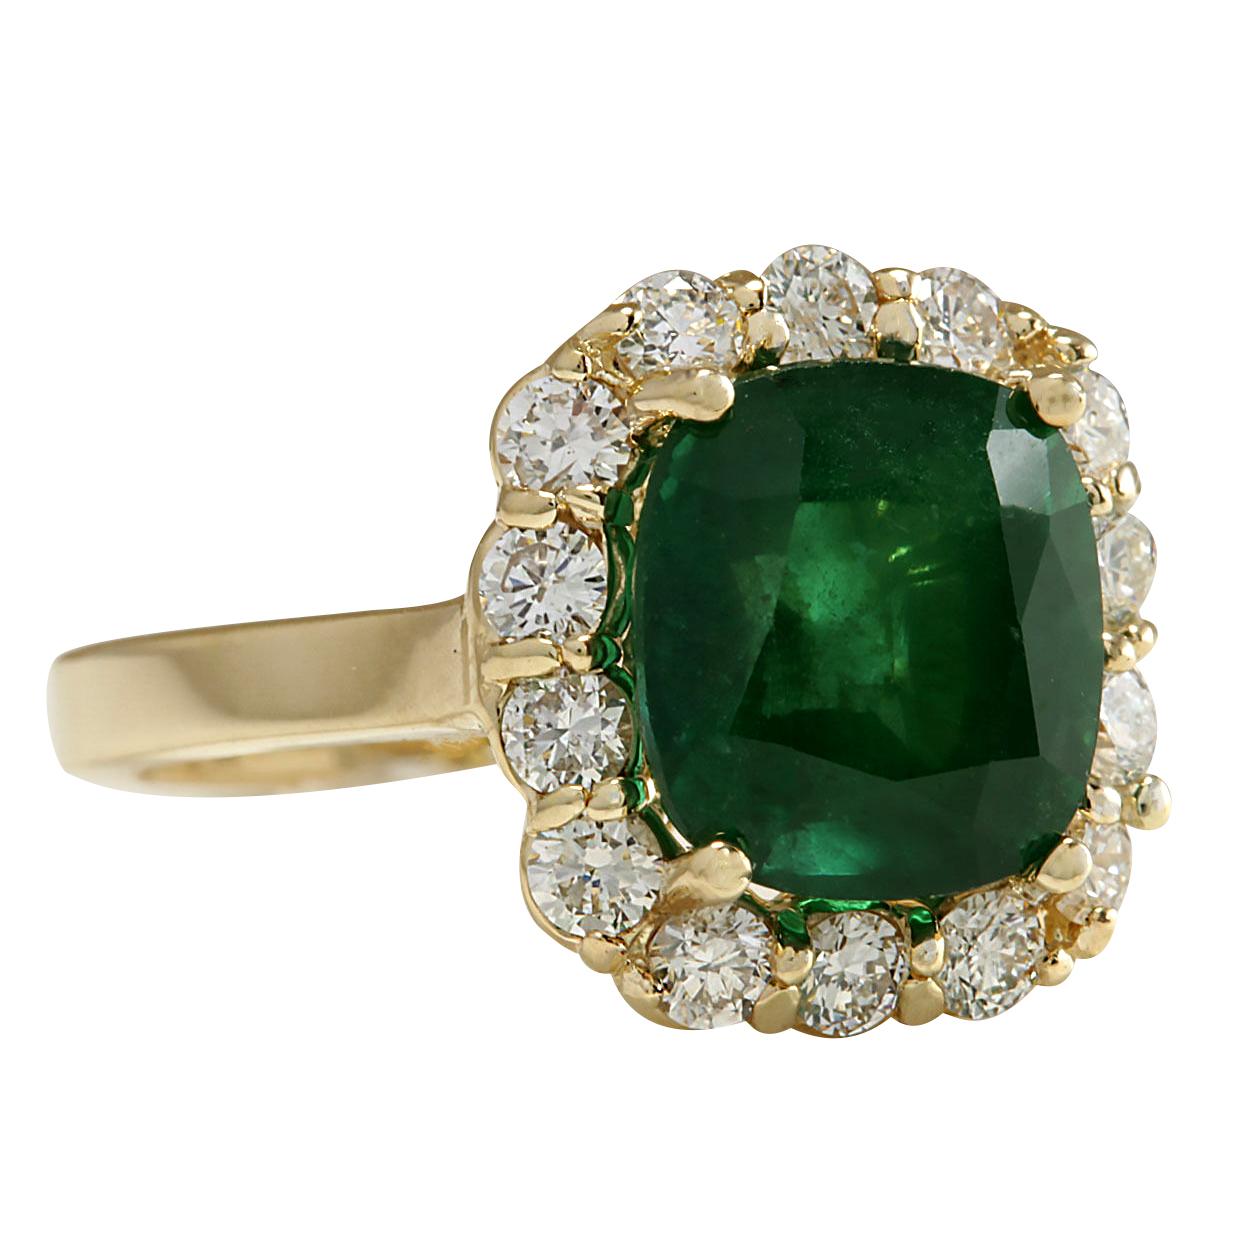 Stamped: 14K Yellow Gold
Total Ring Weight: 5.5 Grams
Total Natural Emerald Weight is 4.25 Carat (Measures: 10.00x8.00 mm)
Color: Green
Total Natural Diamond Weight is 0.85 Carat
Color: F-G, Clarity: VS2-SI1
Face Measures: 14.75x13.60 mm
Sku: